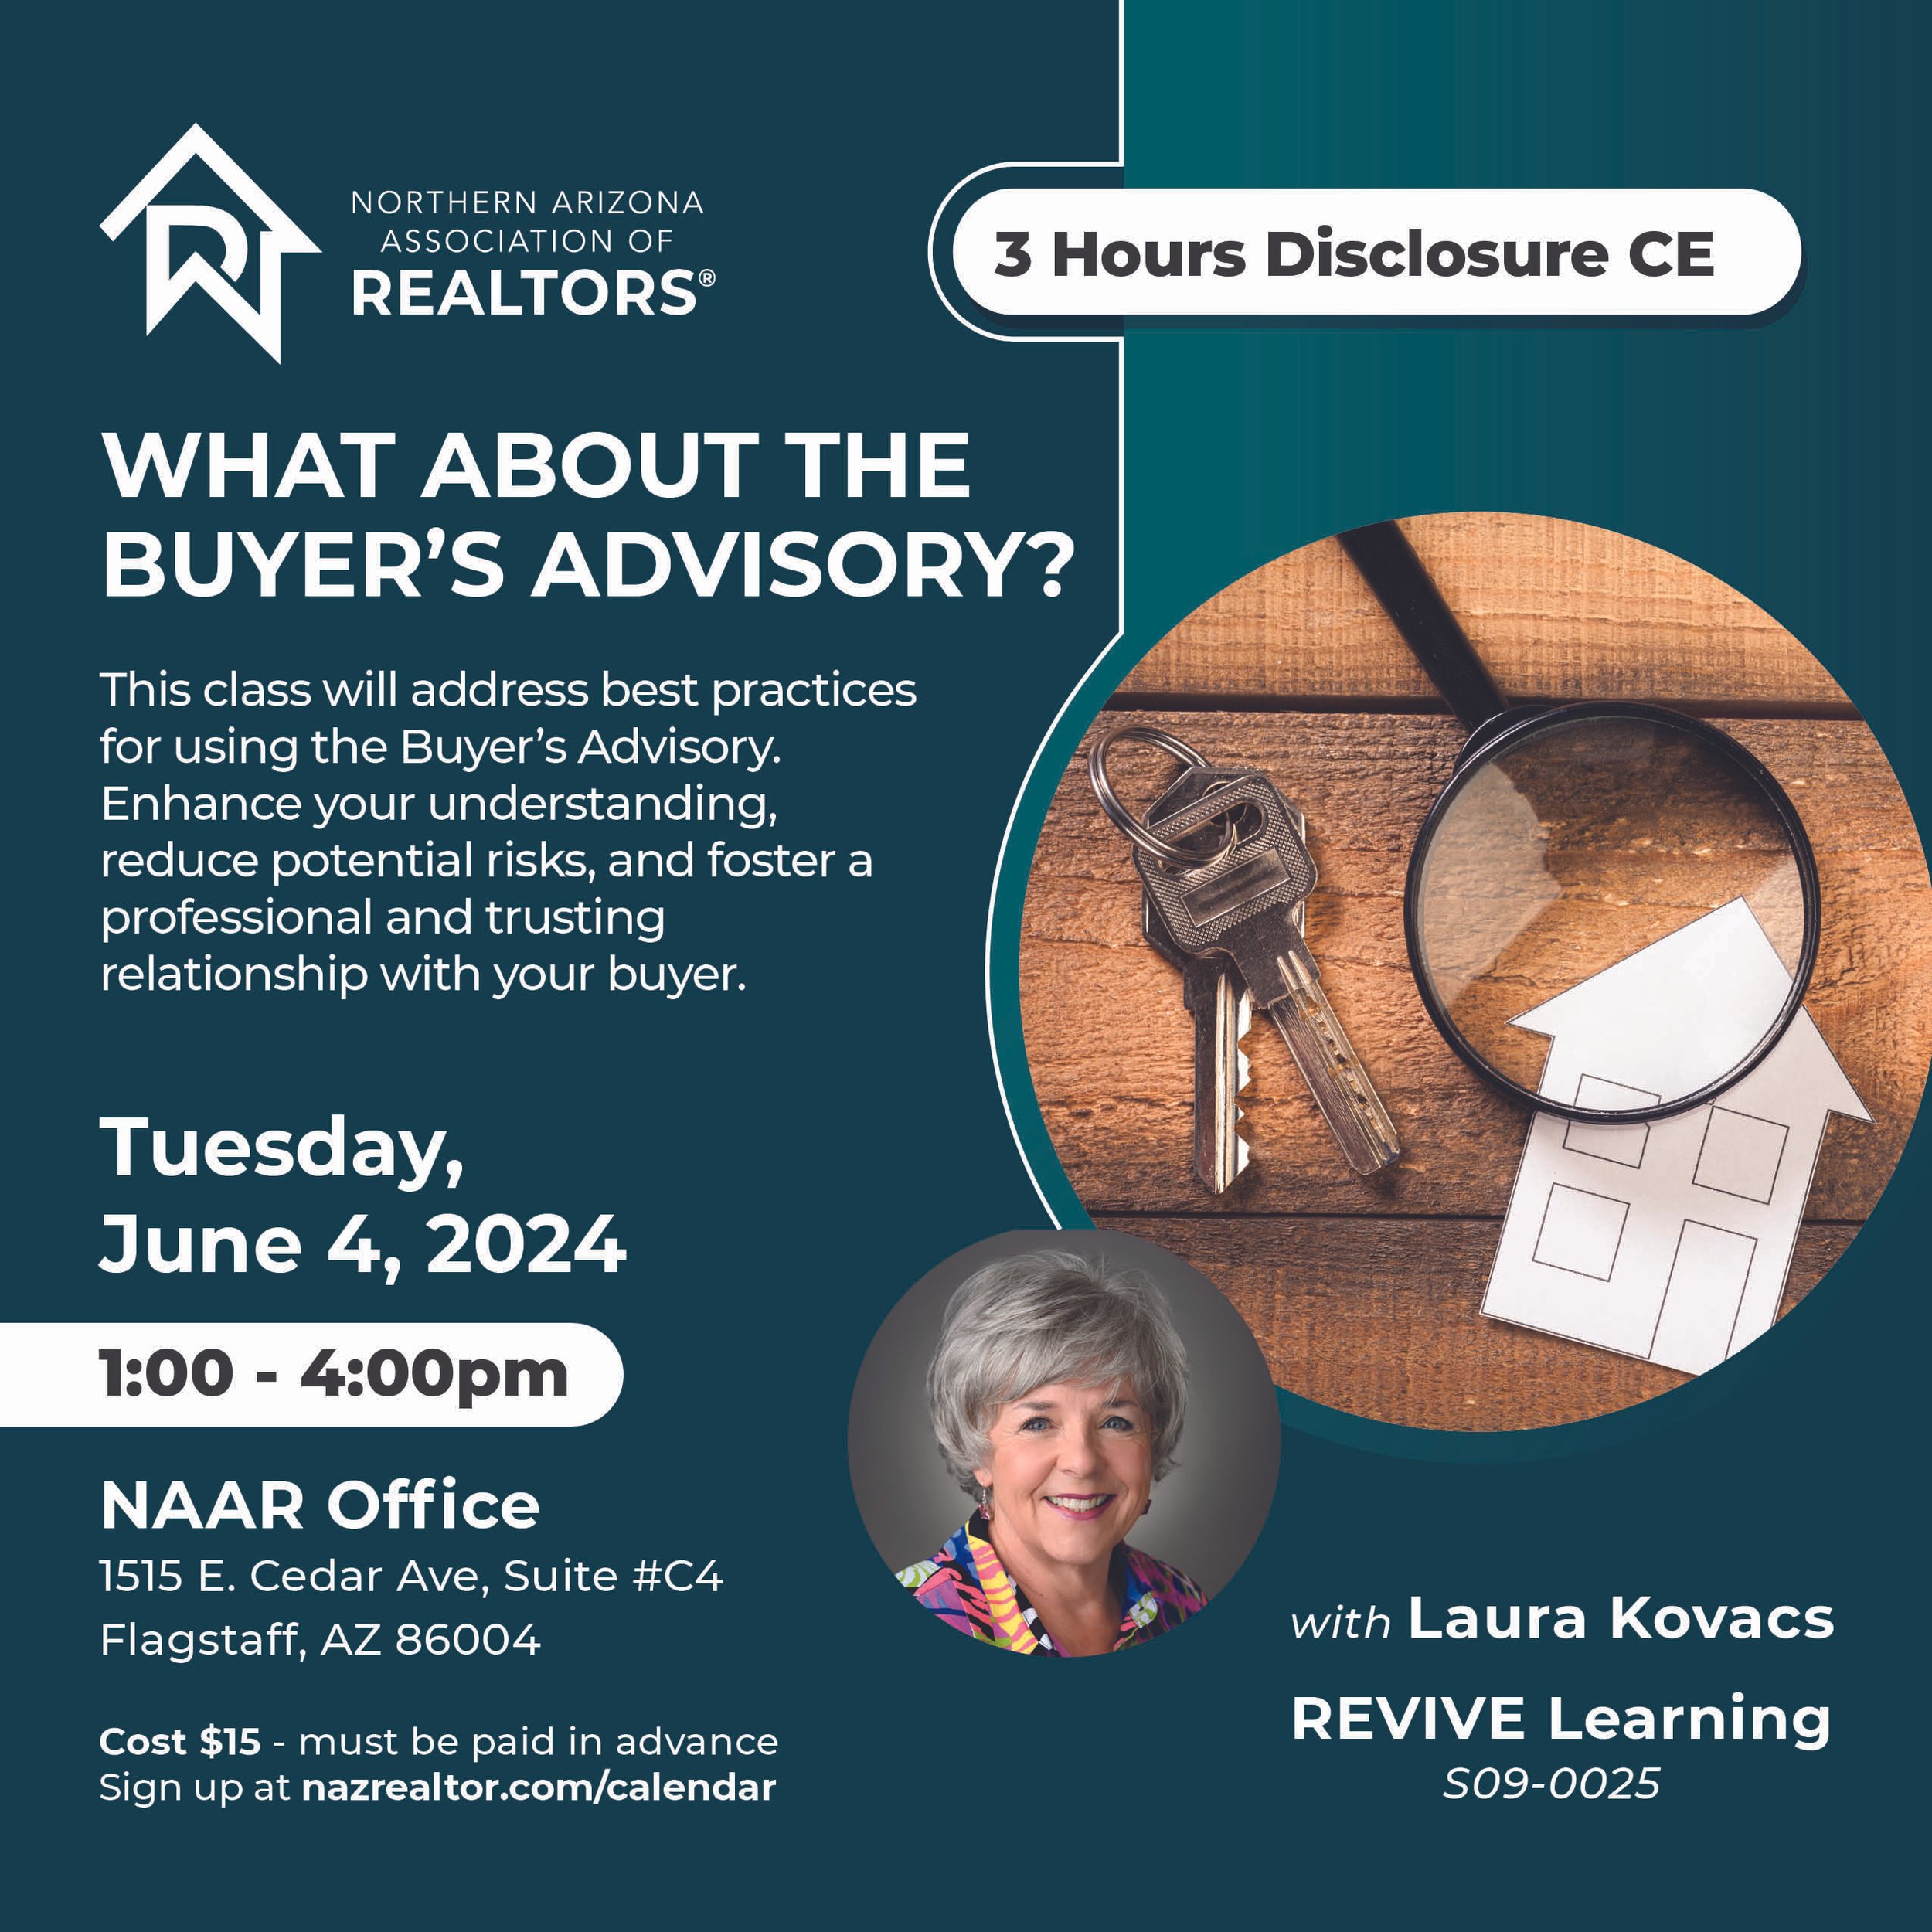 CE 6-4-24 What About the Buyers Advisory- Laura Kovacs.jpg